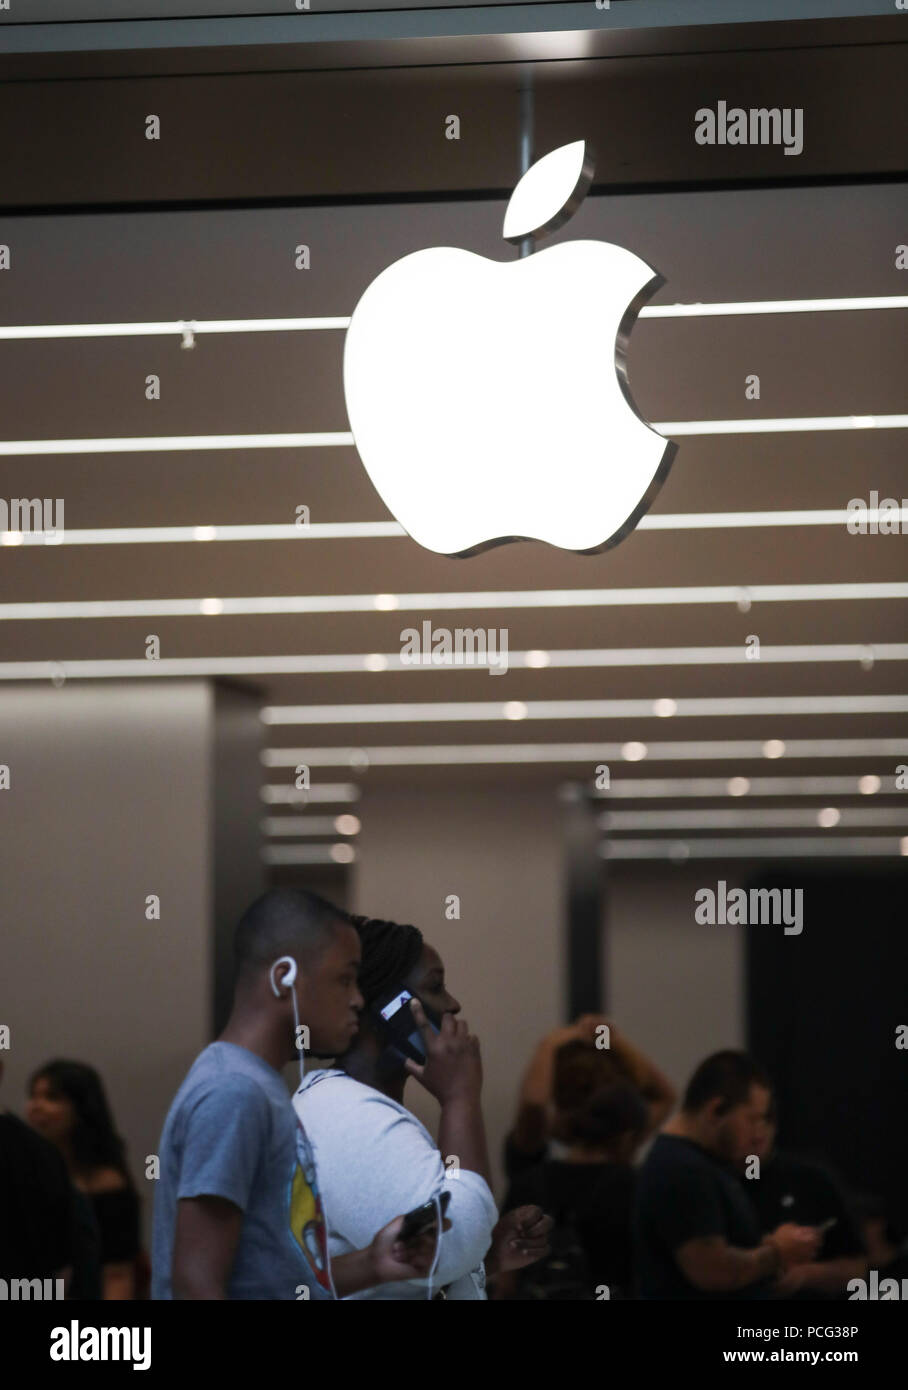 New York, USA. 2nd Aug, 2018. People walk past an Apple store in New York, the United States, Aug. 2, 2018. U.S. tech giant Apple became the first American company that saw its market cap hit 1 trillion U.S. dollars in the U.S. history after its shares rose 2.8 percent to a session high of 207.05 dollars around midday trading on Thursday. Credit: Wang Ying/Xinhua/Alamy Live News Stock Photo